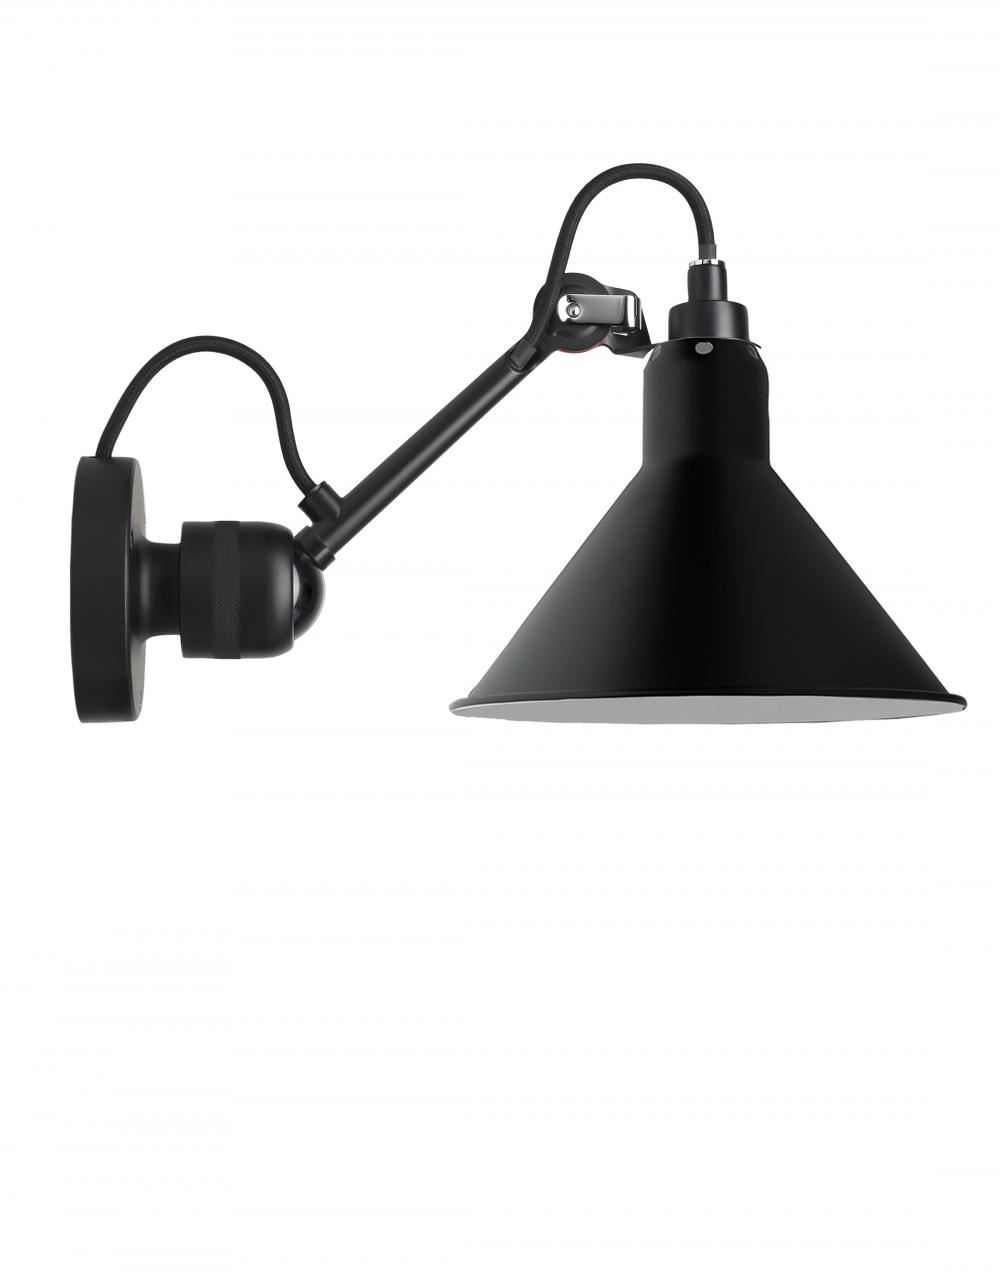 Lampe Gras 304 Small Wall Light Black Arm Black Shade Conic Hardwired